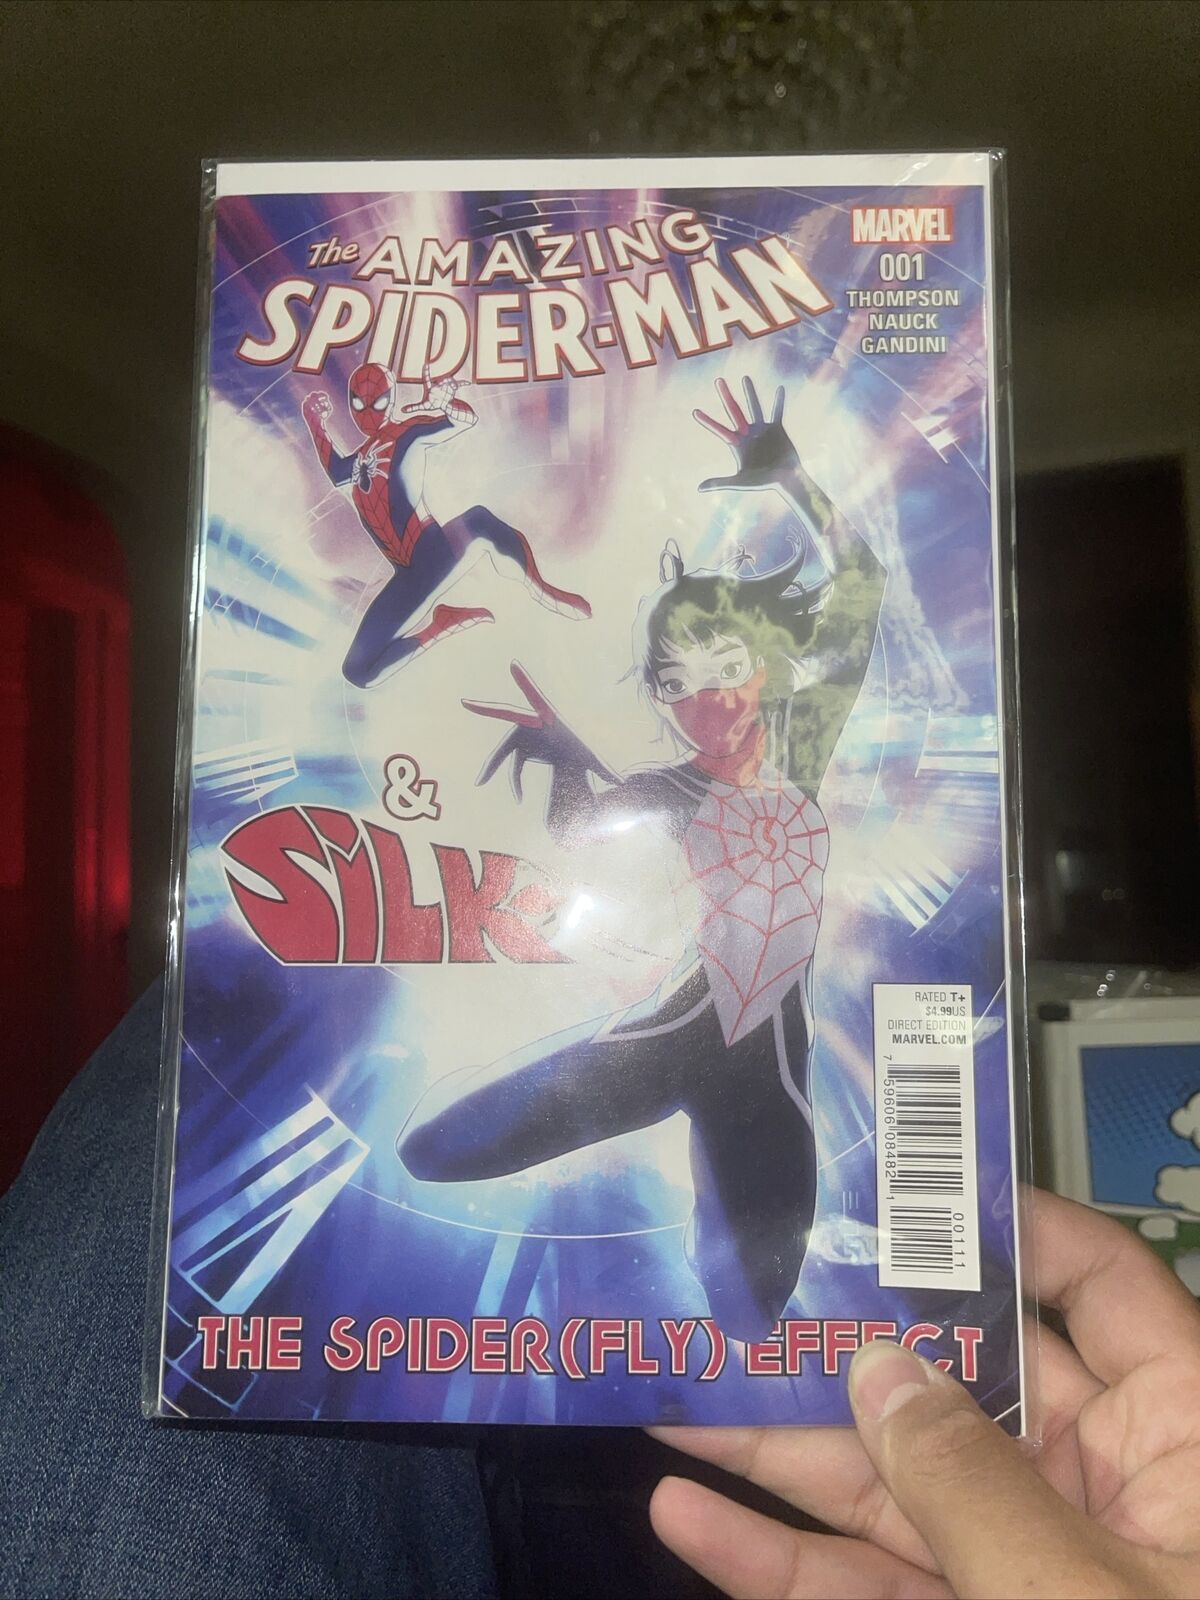 The Amazing Spider-Man & Silk #1 Marvel Comics The Spider Fly Effect VF/NM